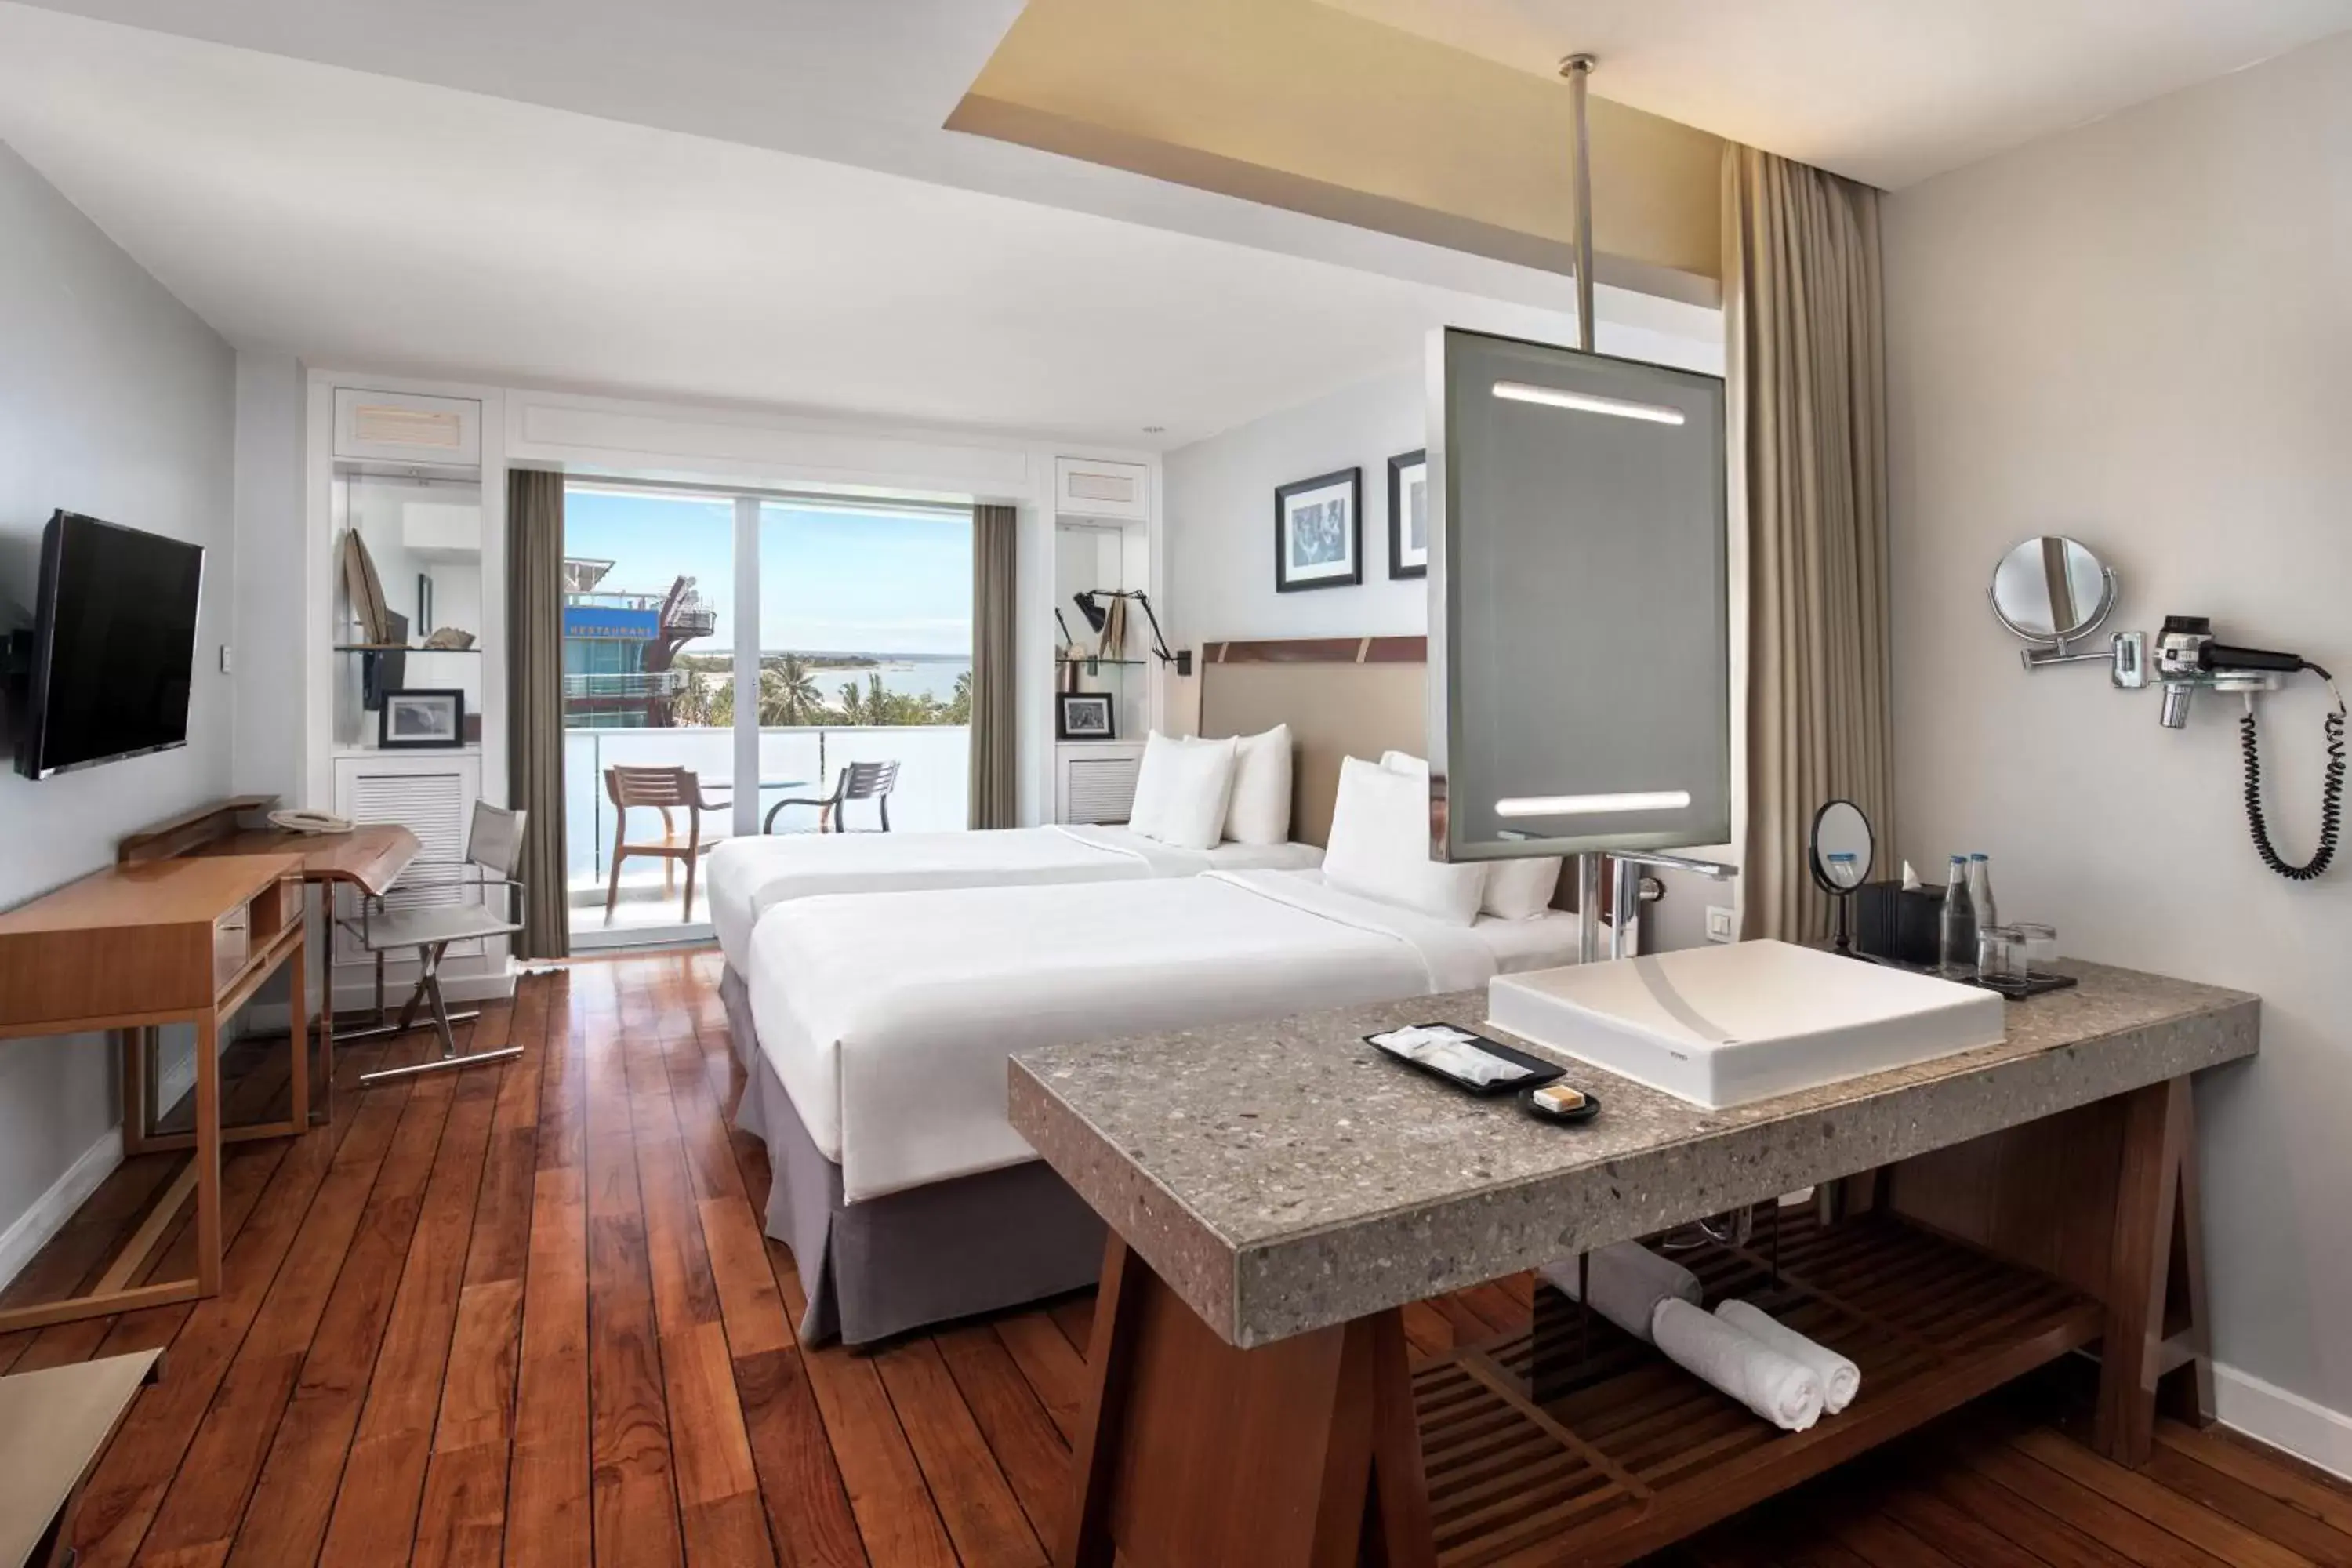 Deluxe Heritage Twin Room with Partial Ocean View in The Kuta Beach Heritage Hotel - Managed by Accor